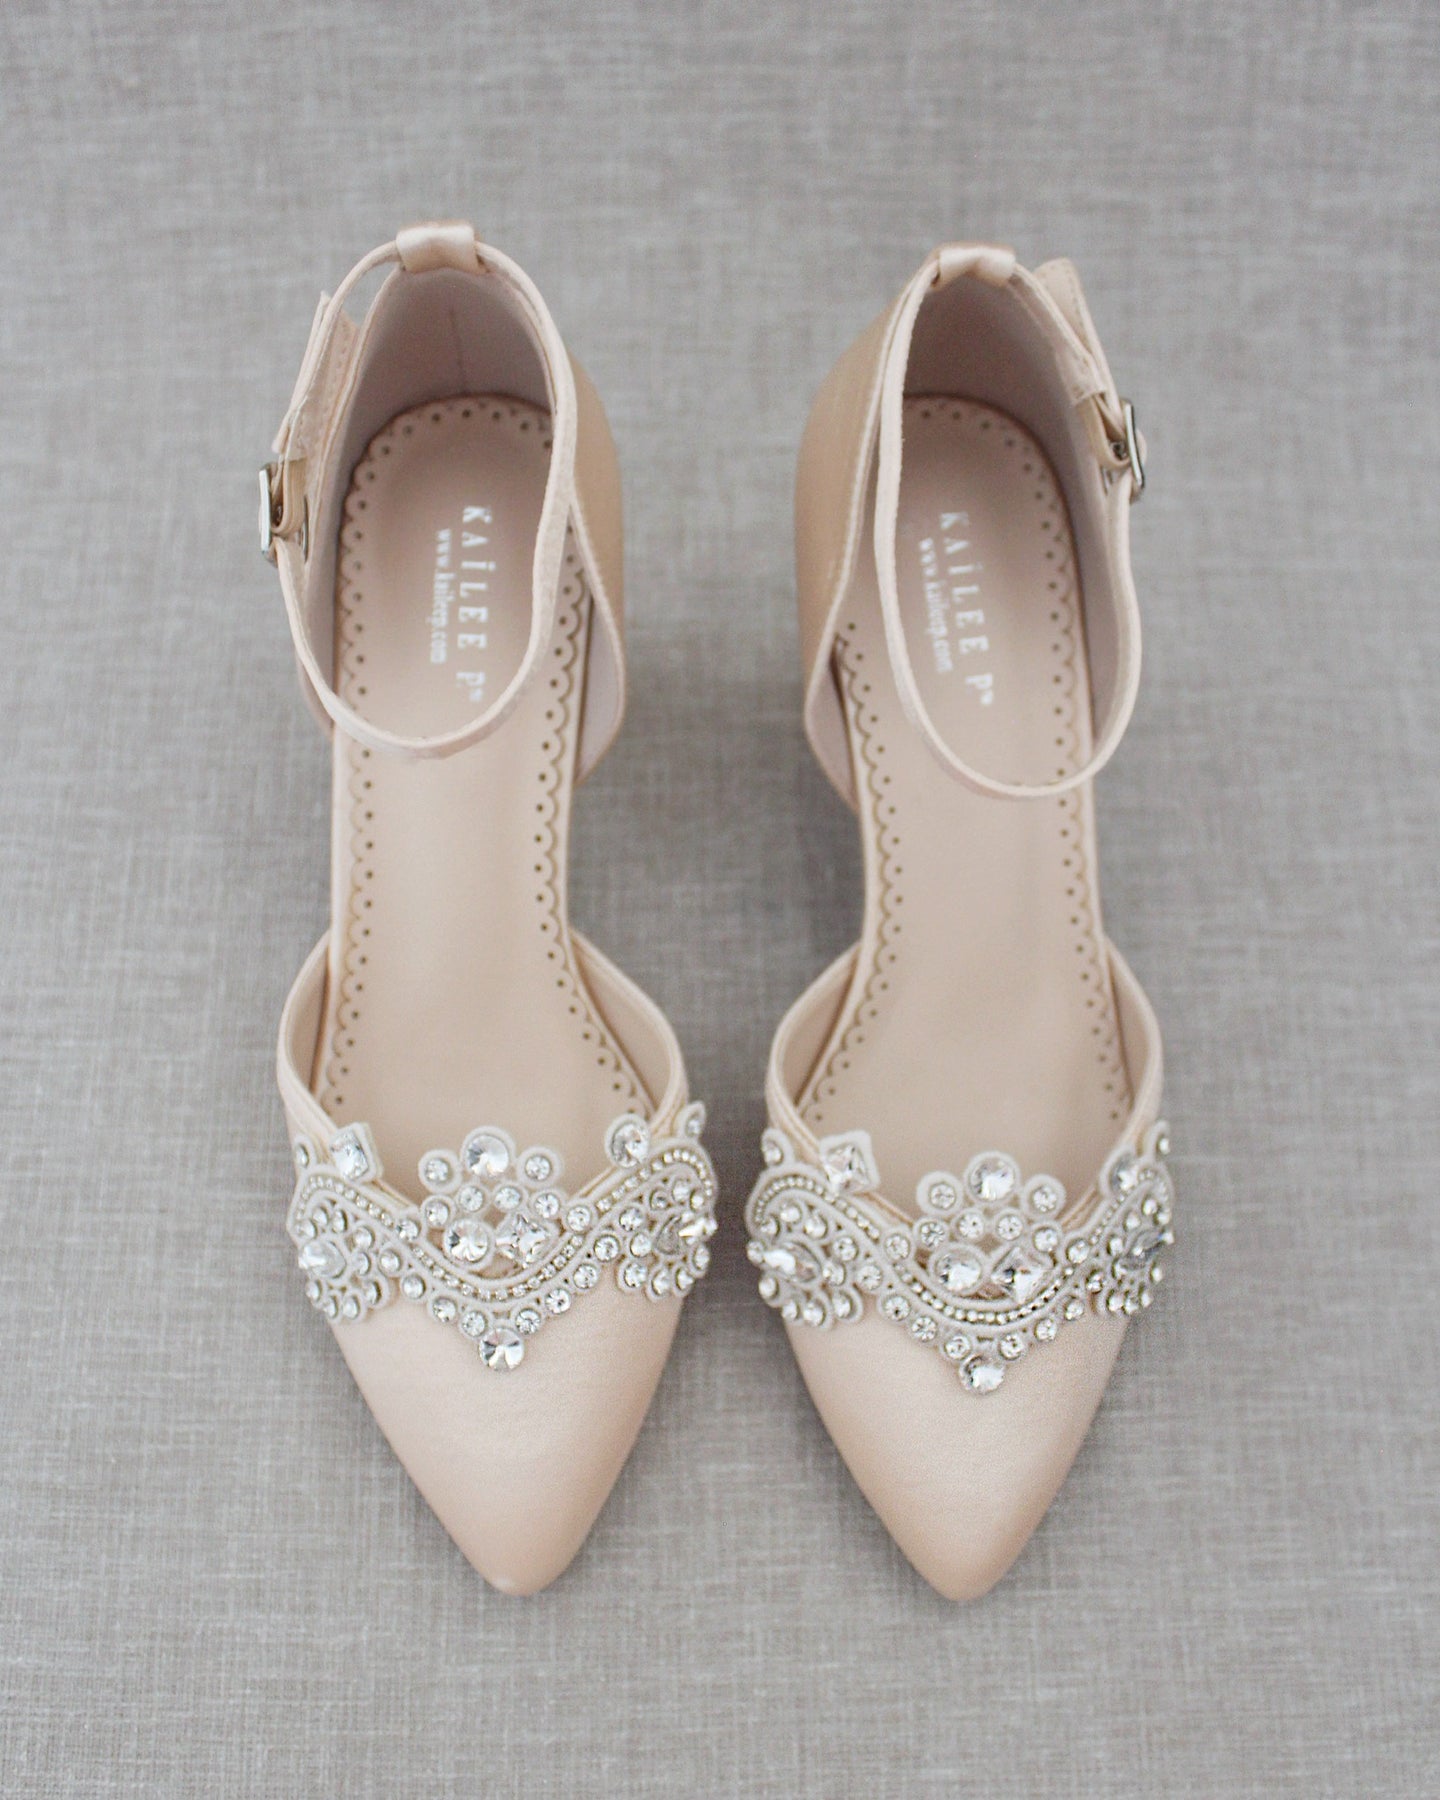 Something Blue Wedding Shoes, Bridesmaids Shoes, Formal Shoes – Page 2 ...